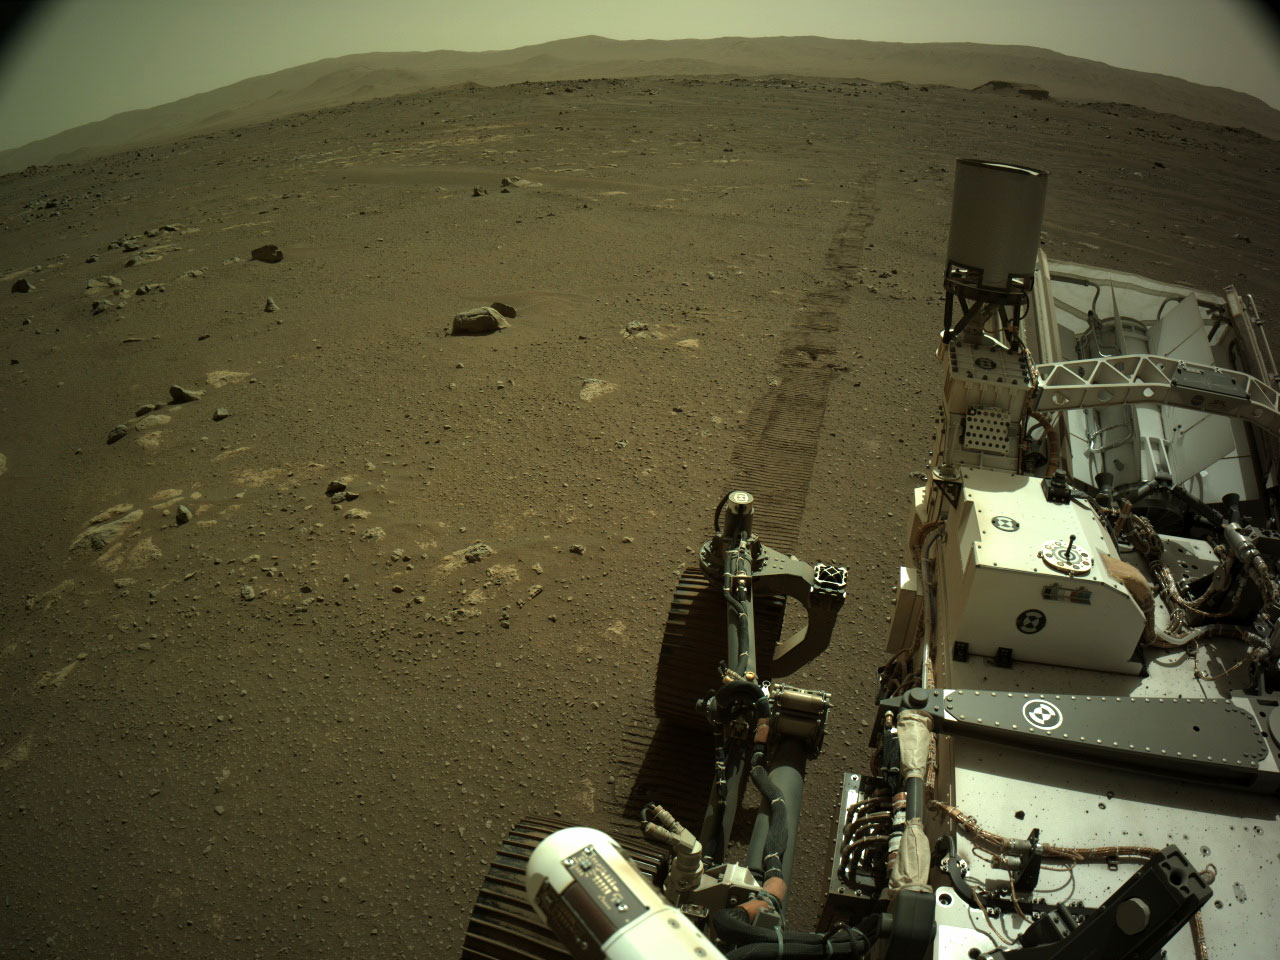 Image taken by Perseverance after driving with rover tracks behind it.